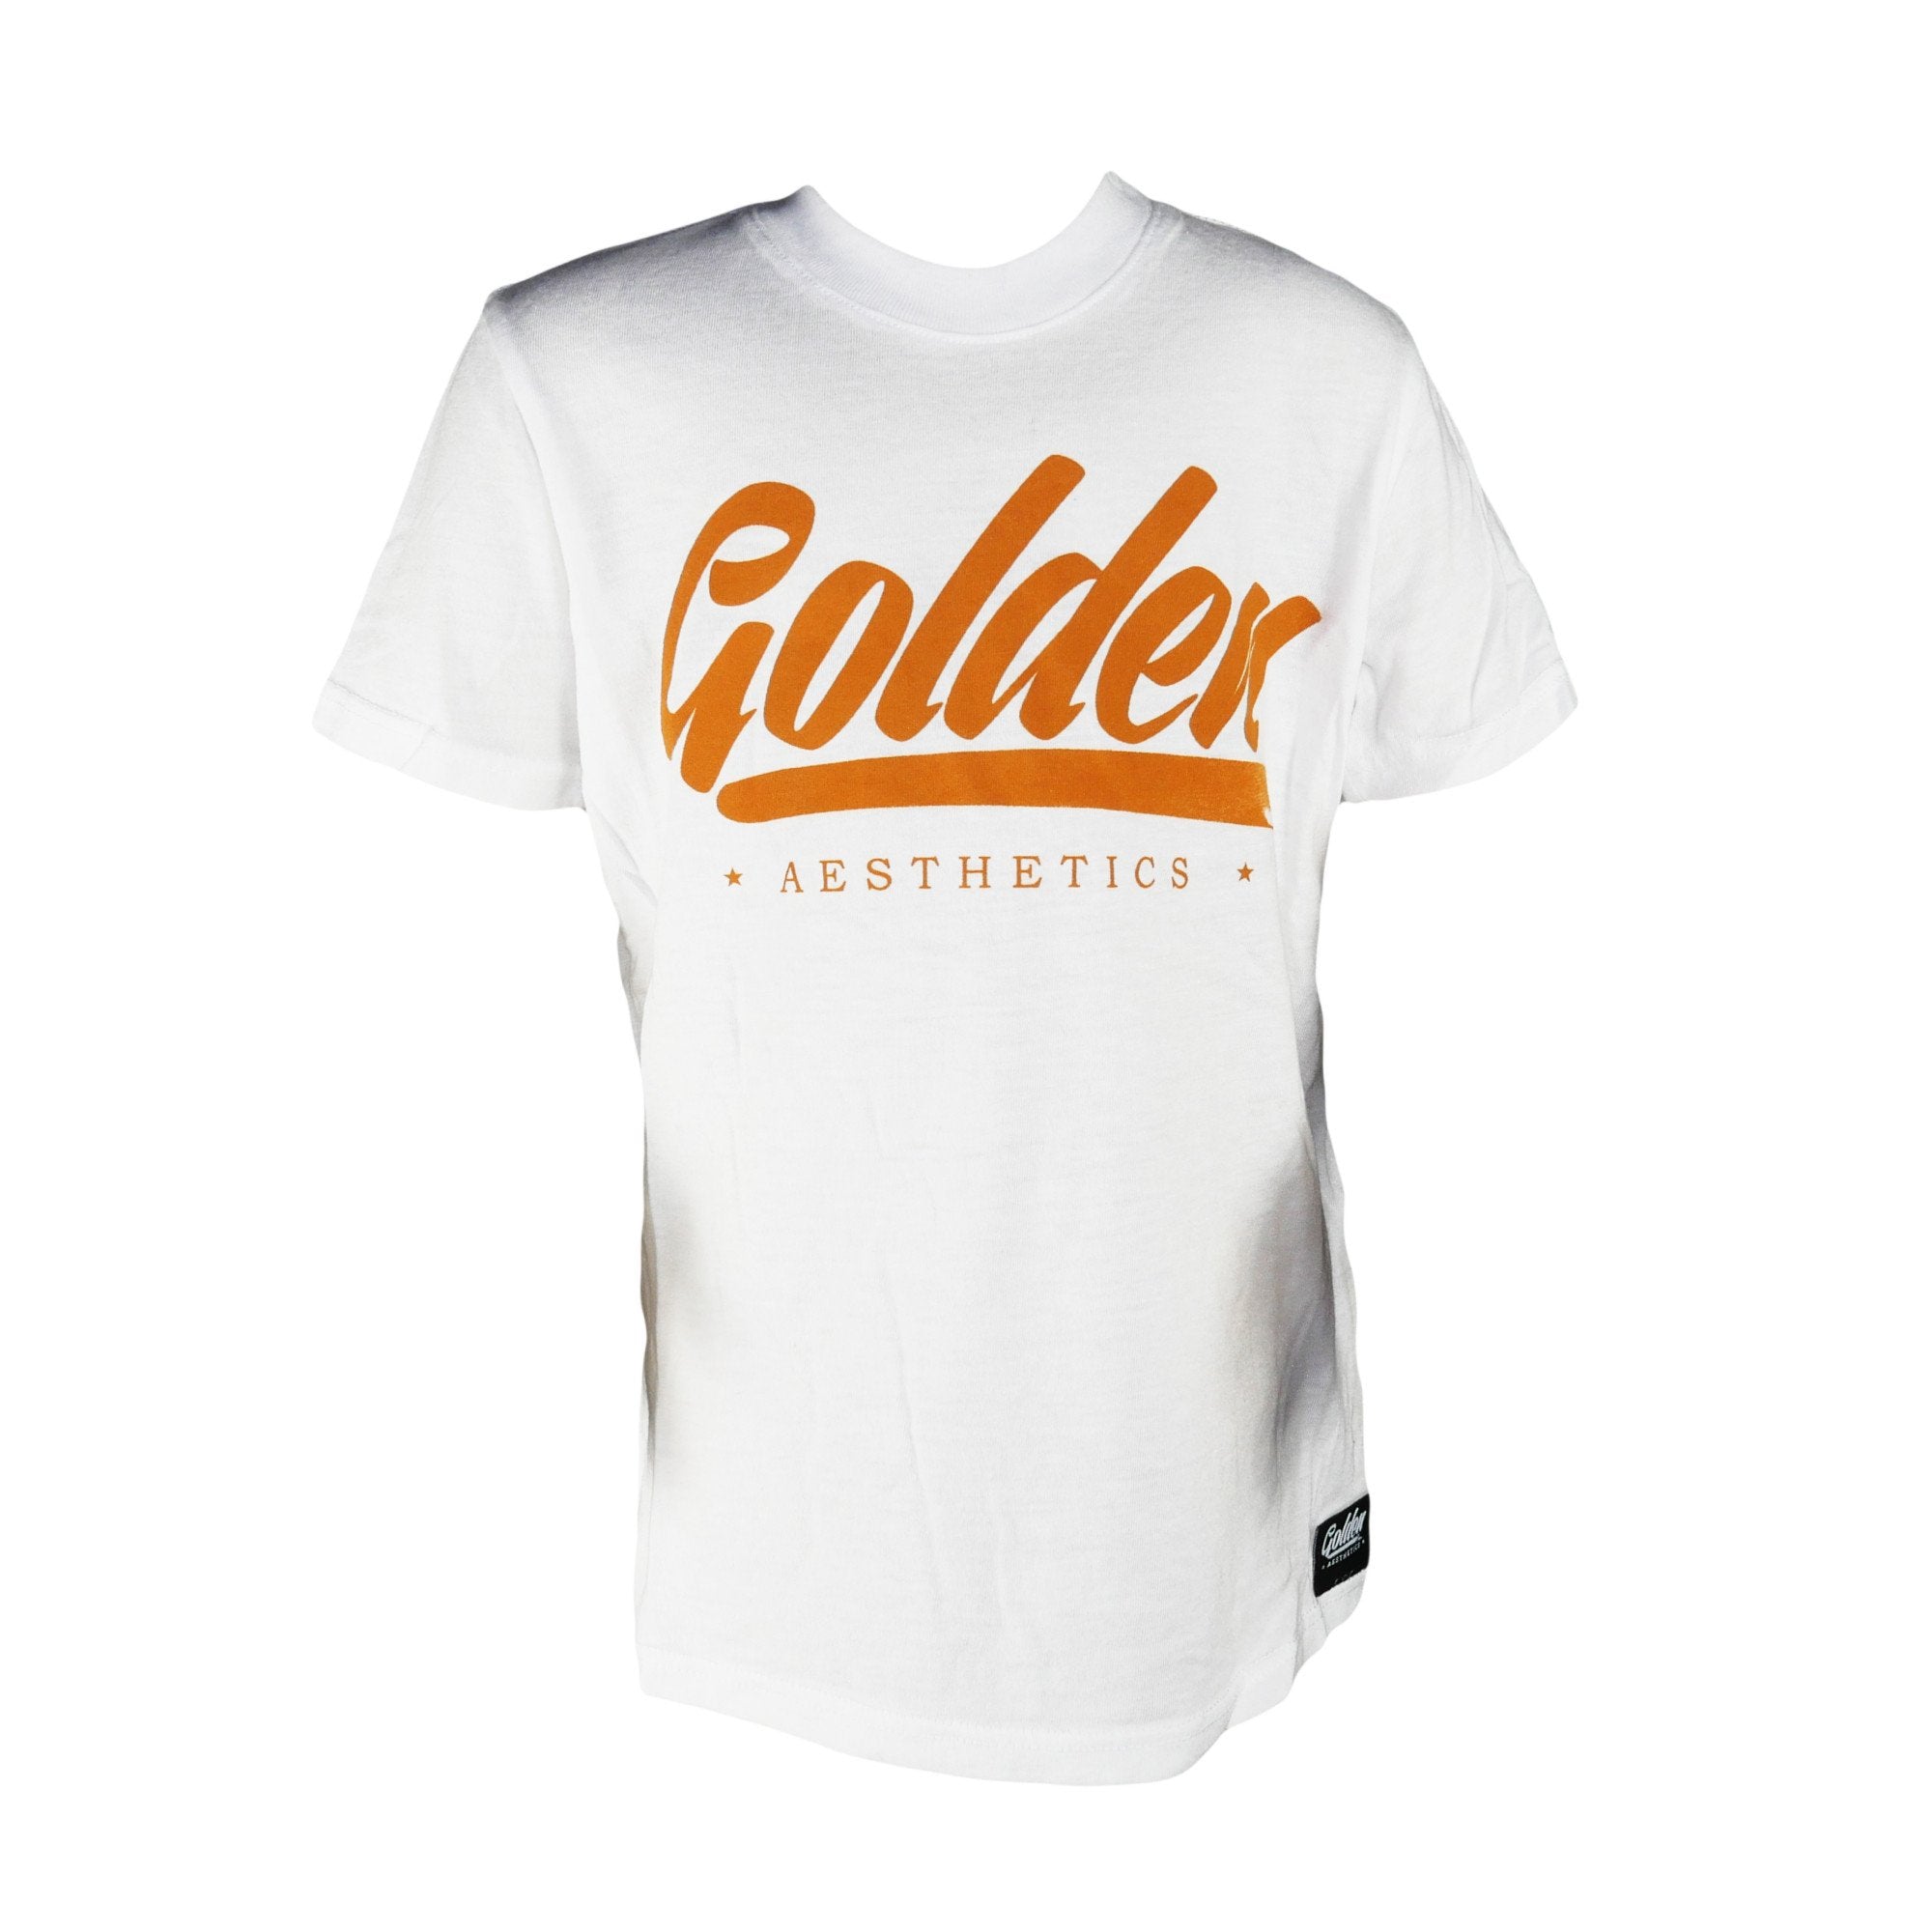 Kid's Collection T-Shirt - Ivory - Golden Aesthetics